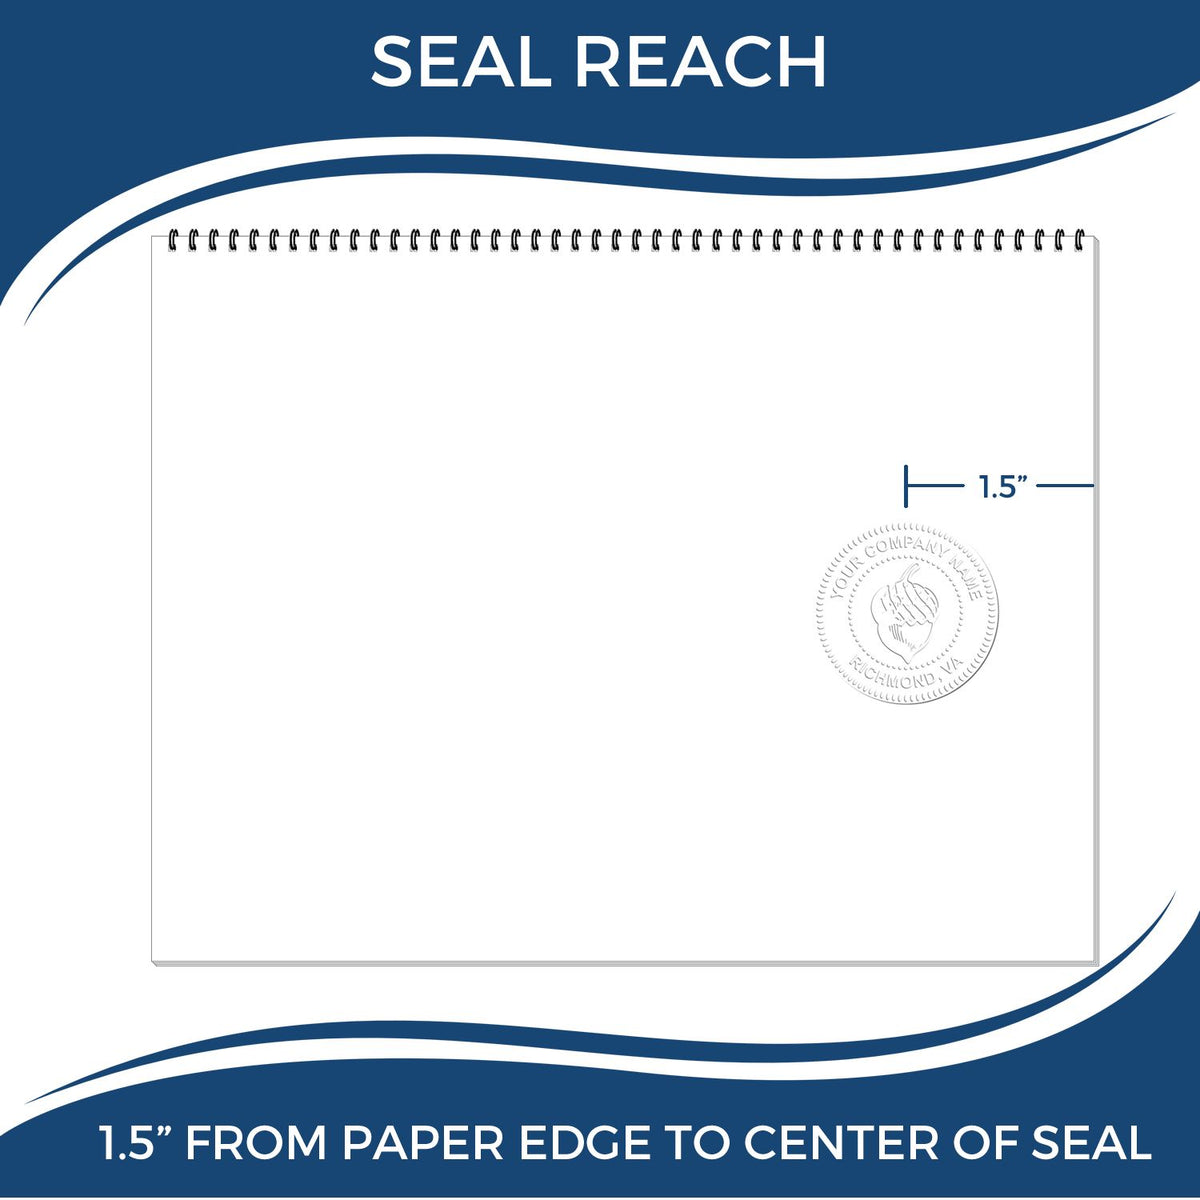 An infographic showing the seal reach which is represented by a ruler and a miniature seal image of the Tennessee Desk Architect Embossing Seal